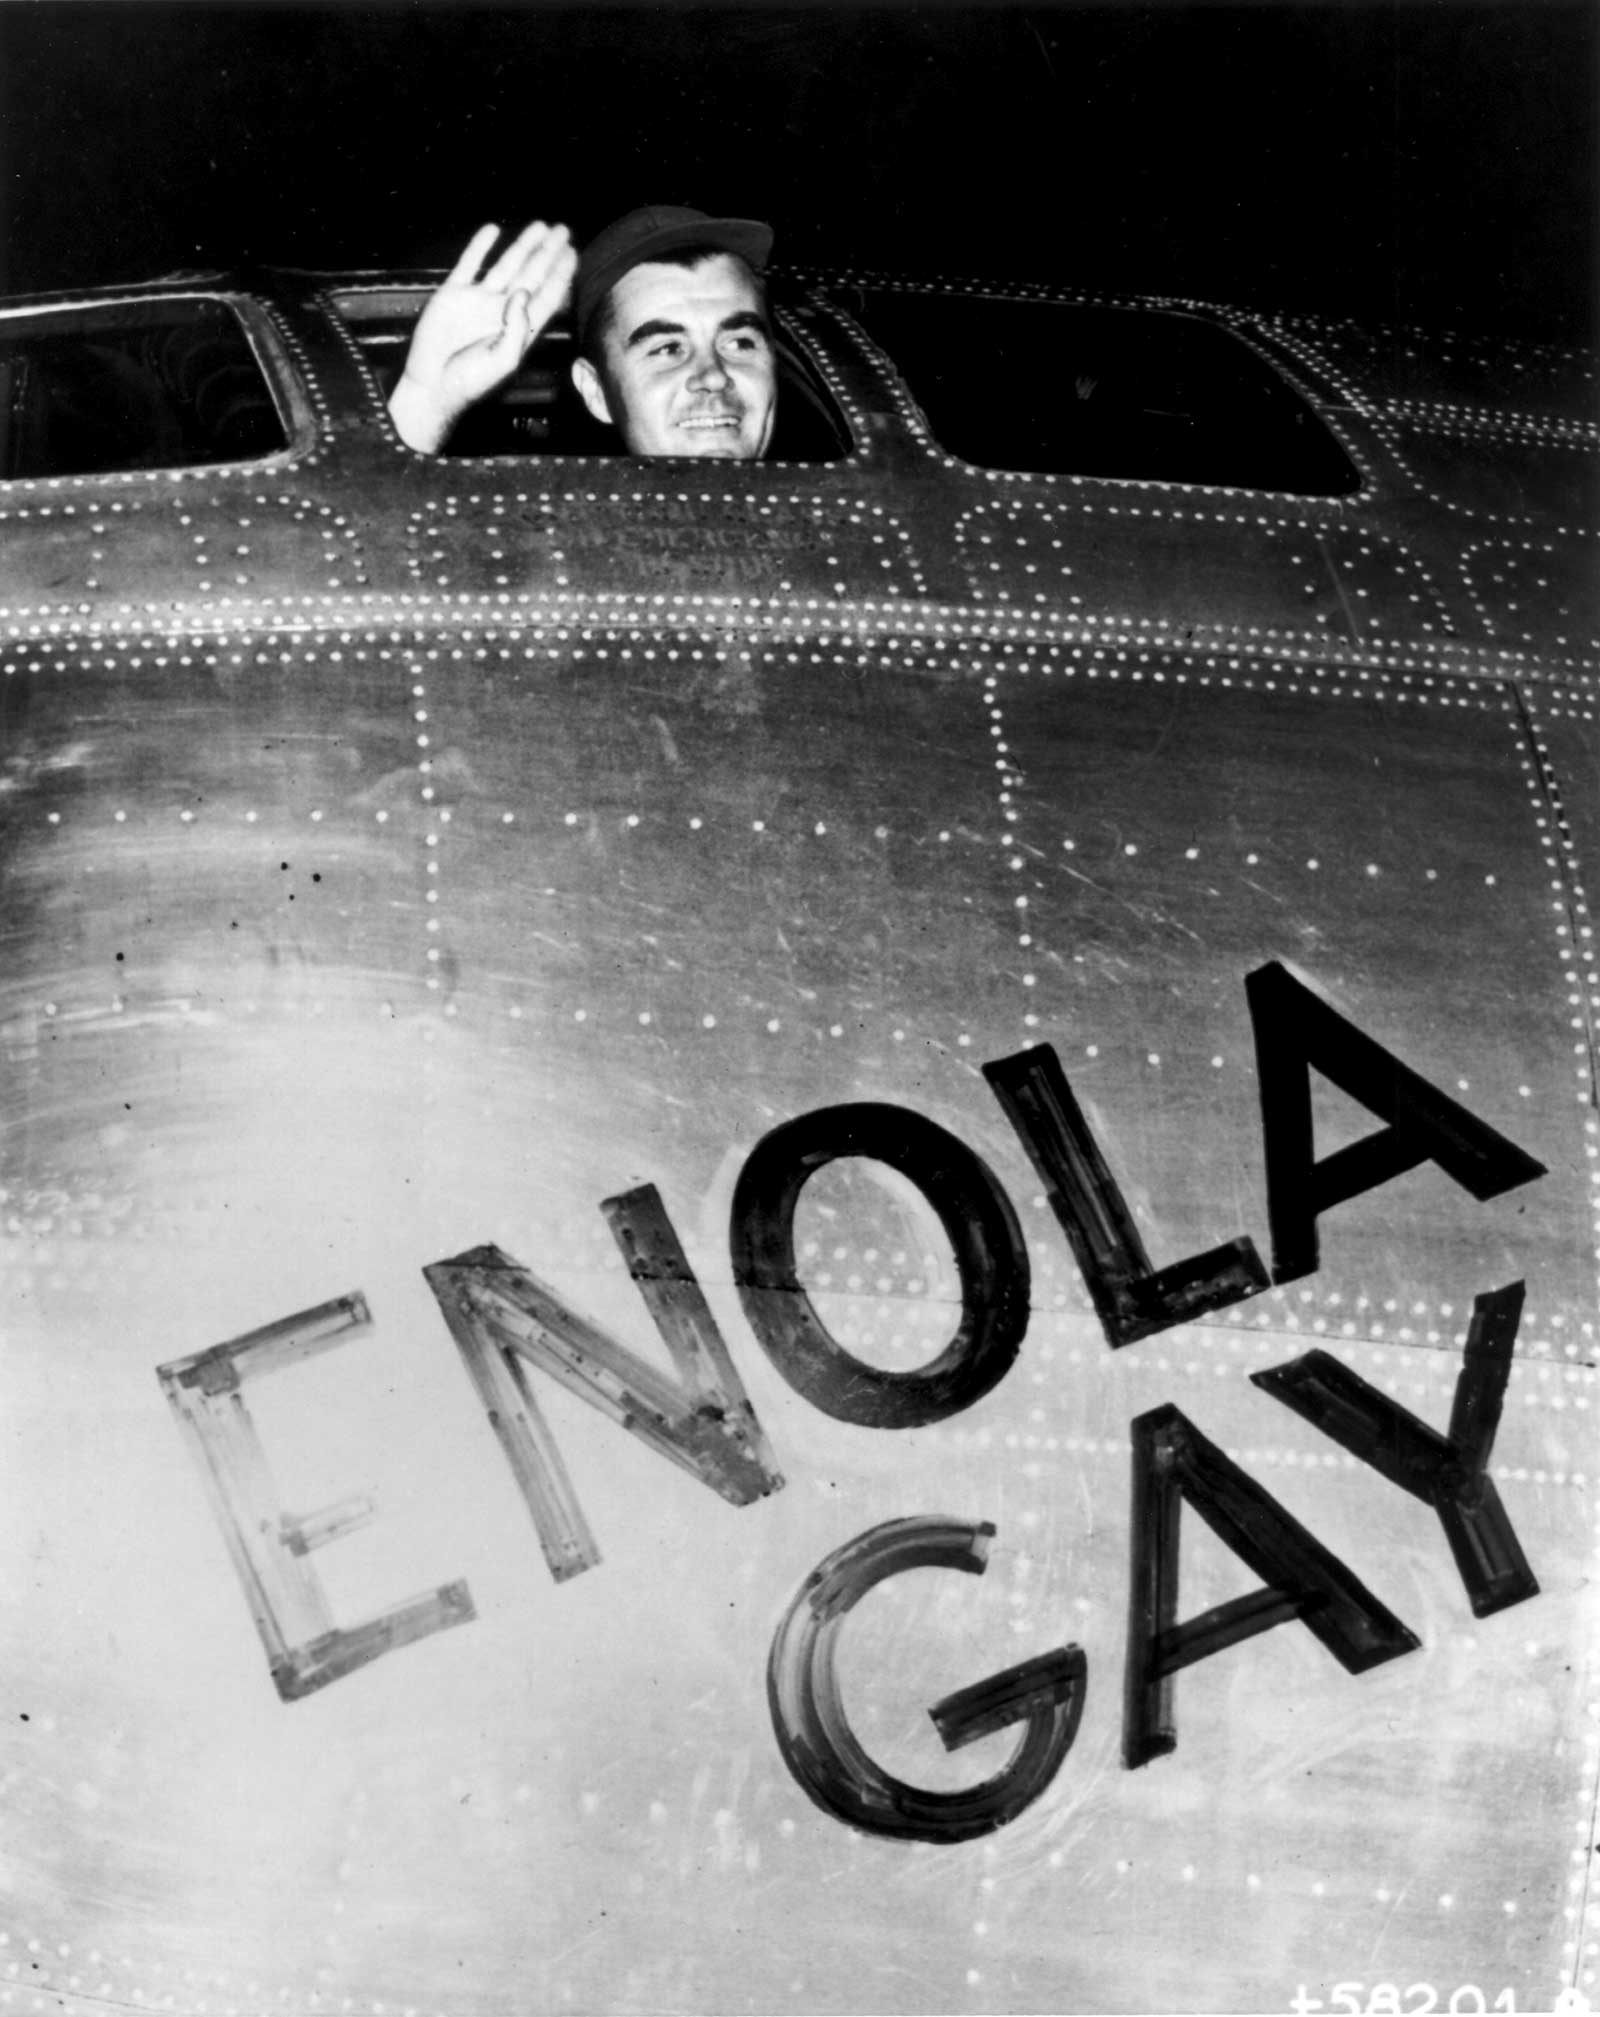 Colonel Paul Tibbets waves from the Enola Gay